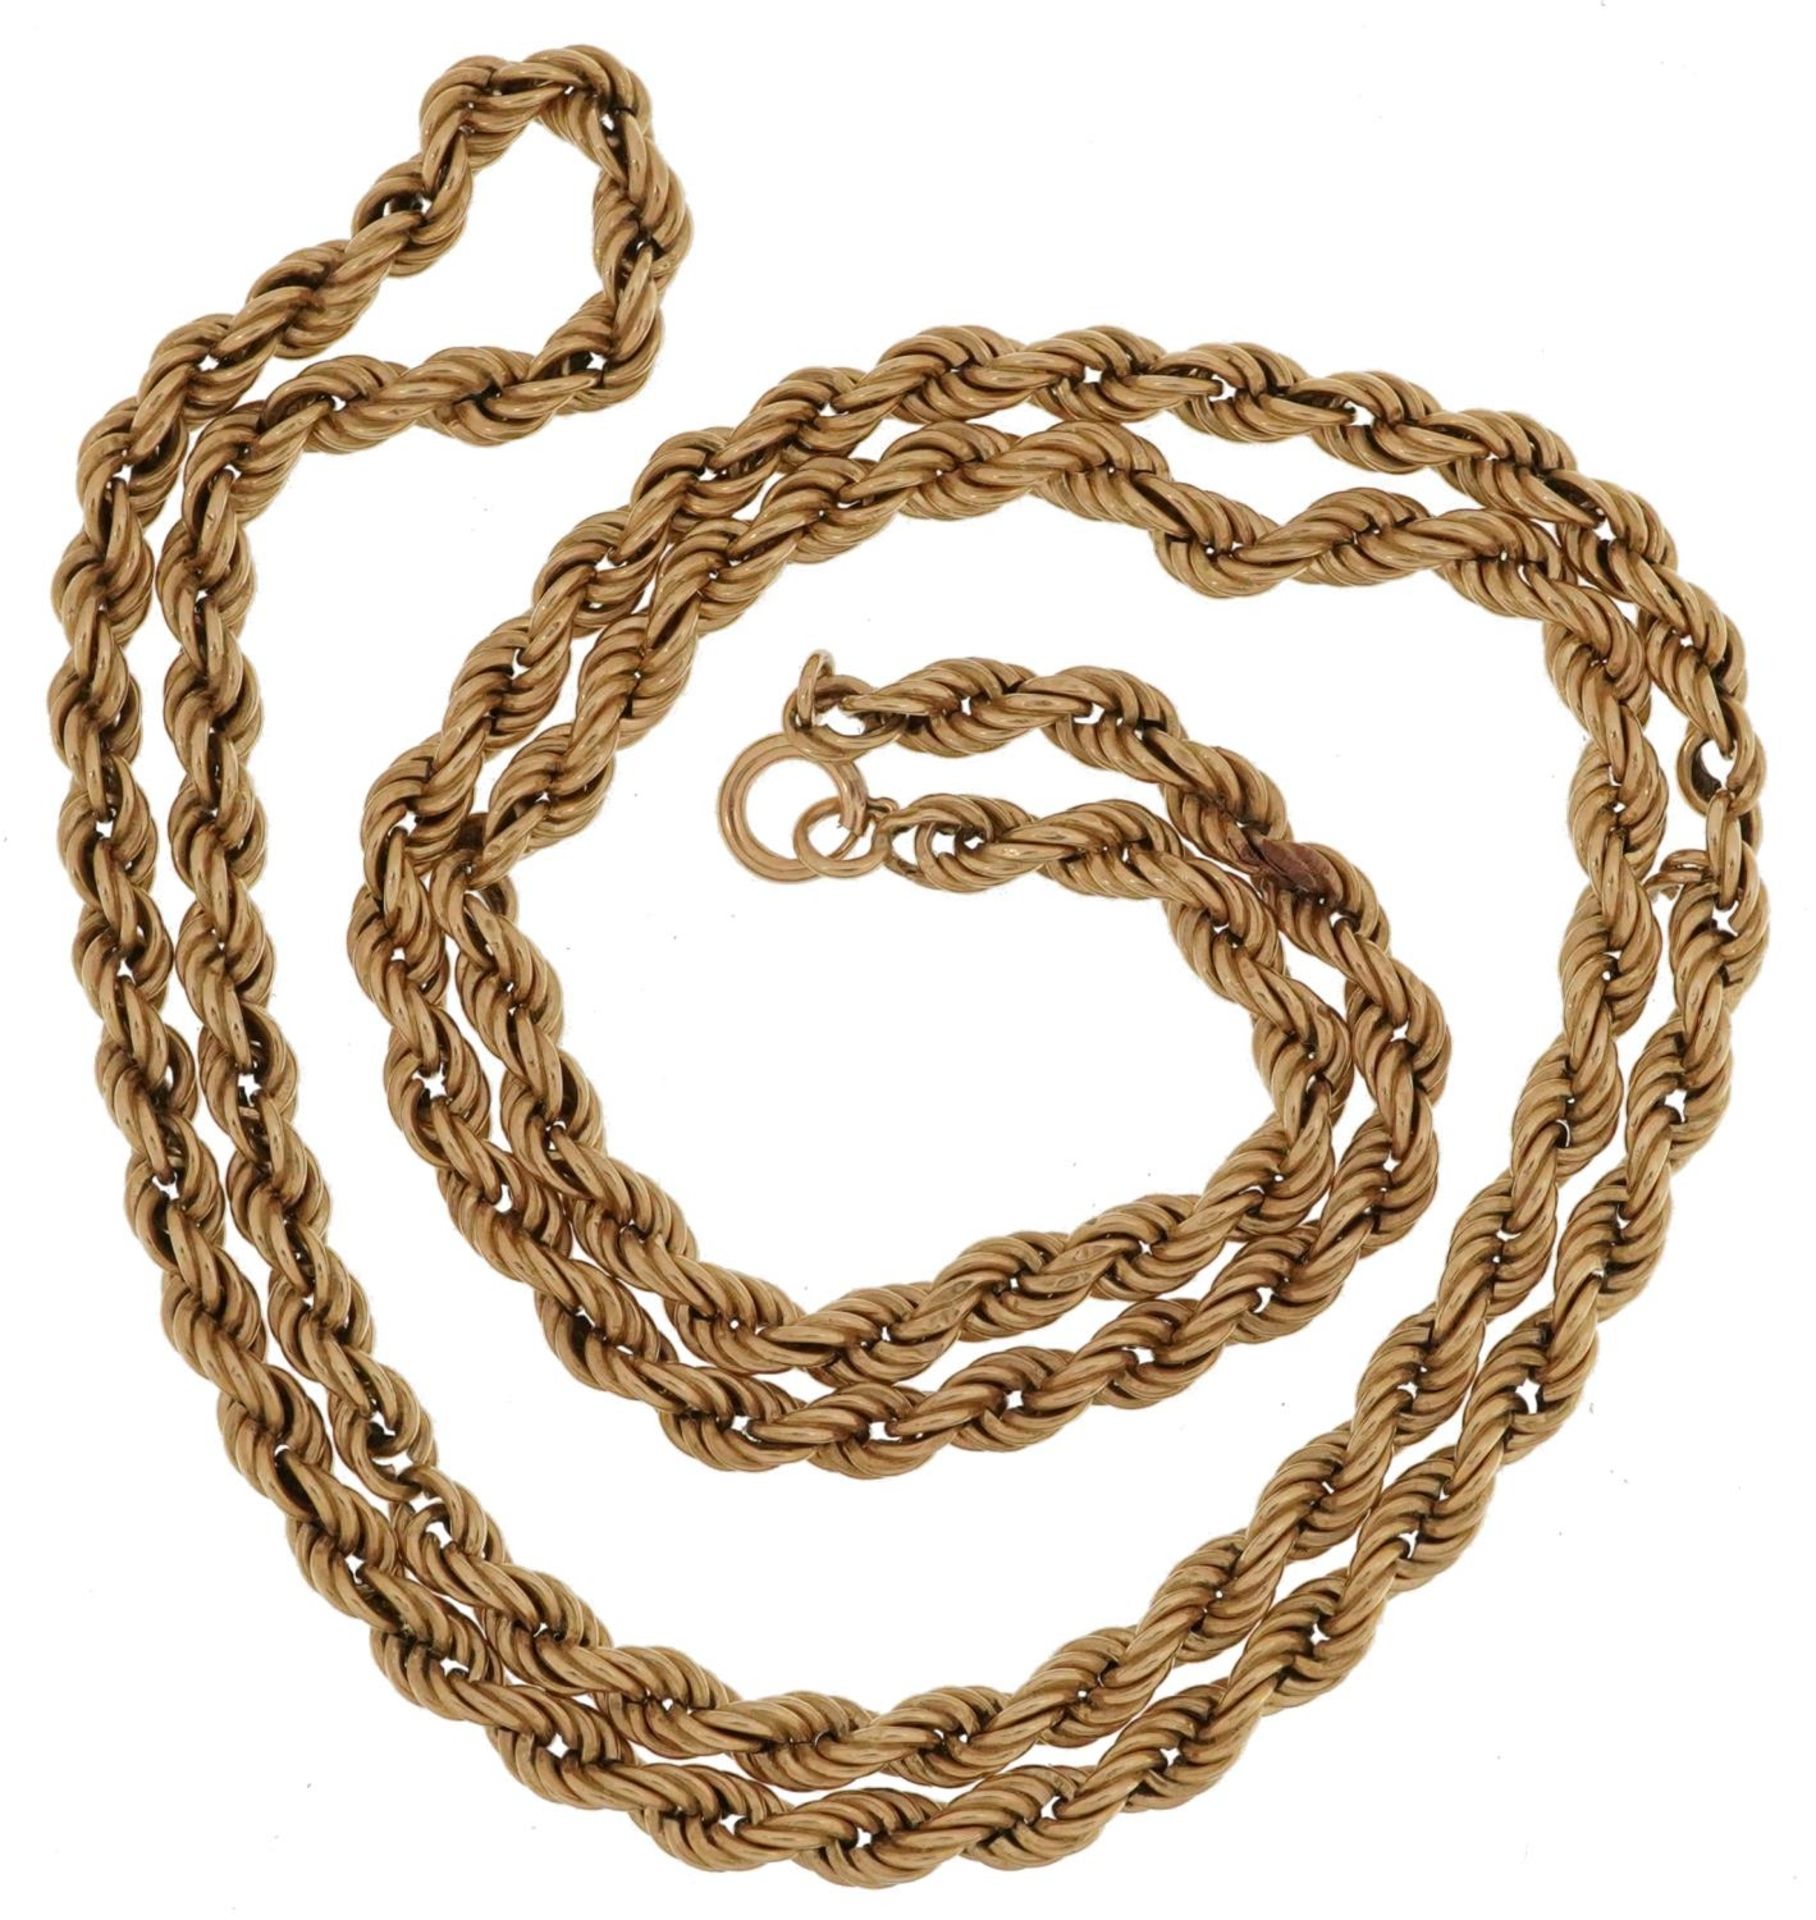 9ct gold rope twist necklace, 50cm in length, 4.9g - Image 2 of 3